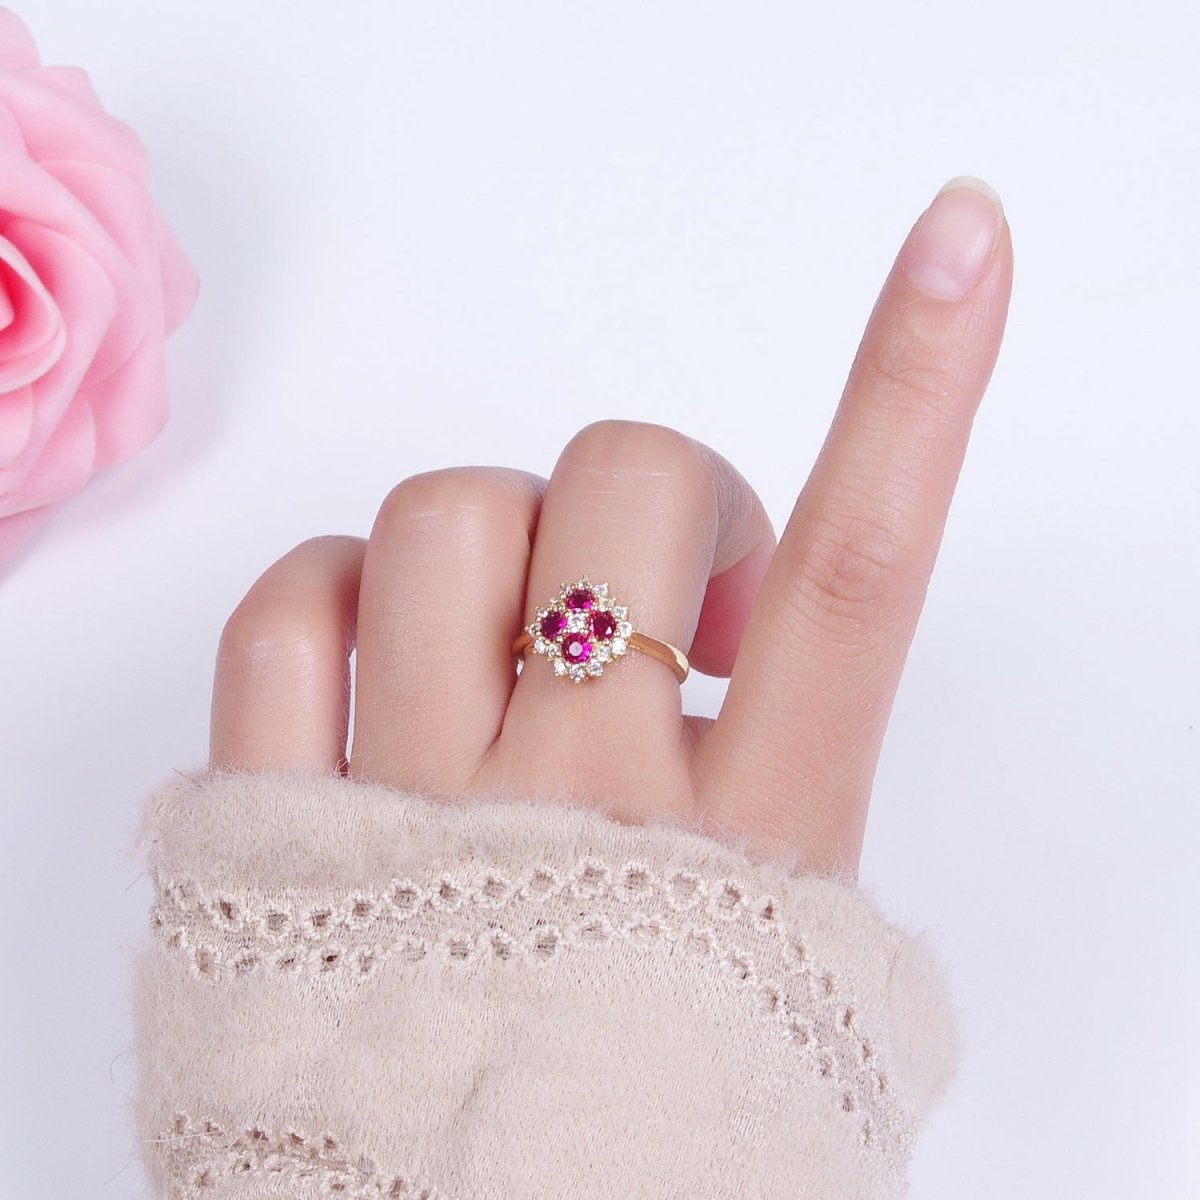 Micro Pave Four Fuchsia Cubic Zirconia Flower Adjustable Gold Ring S-221 - DLUXCA